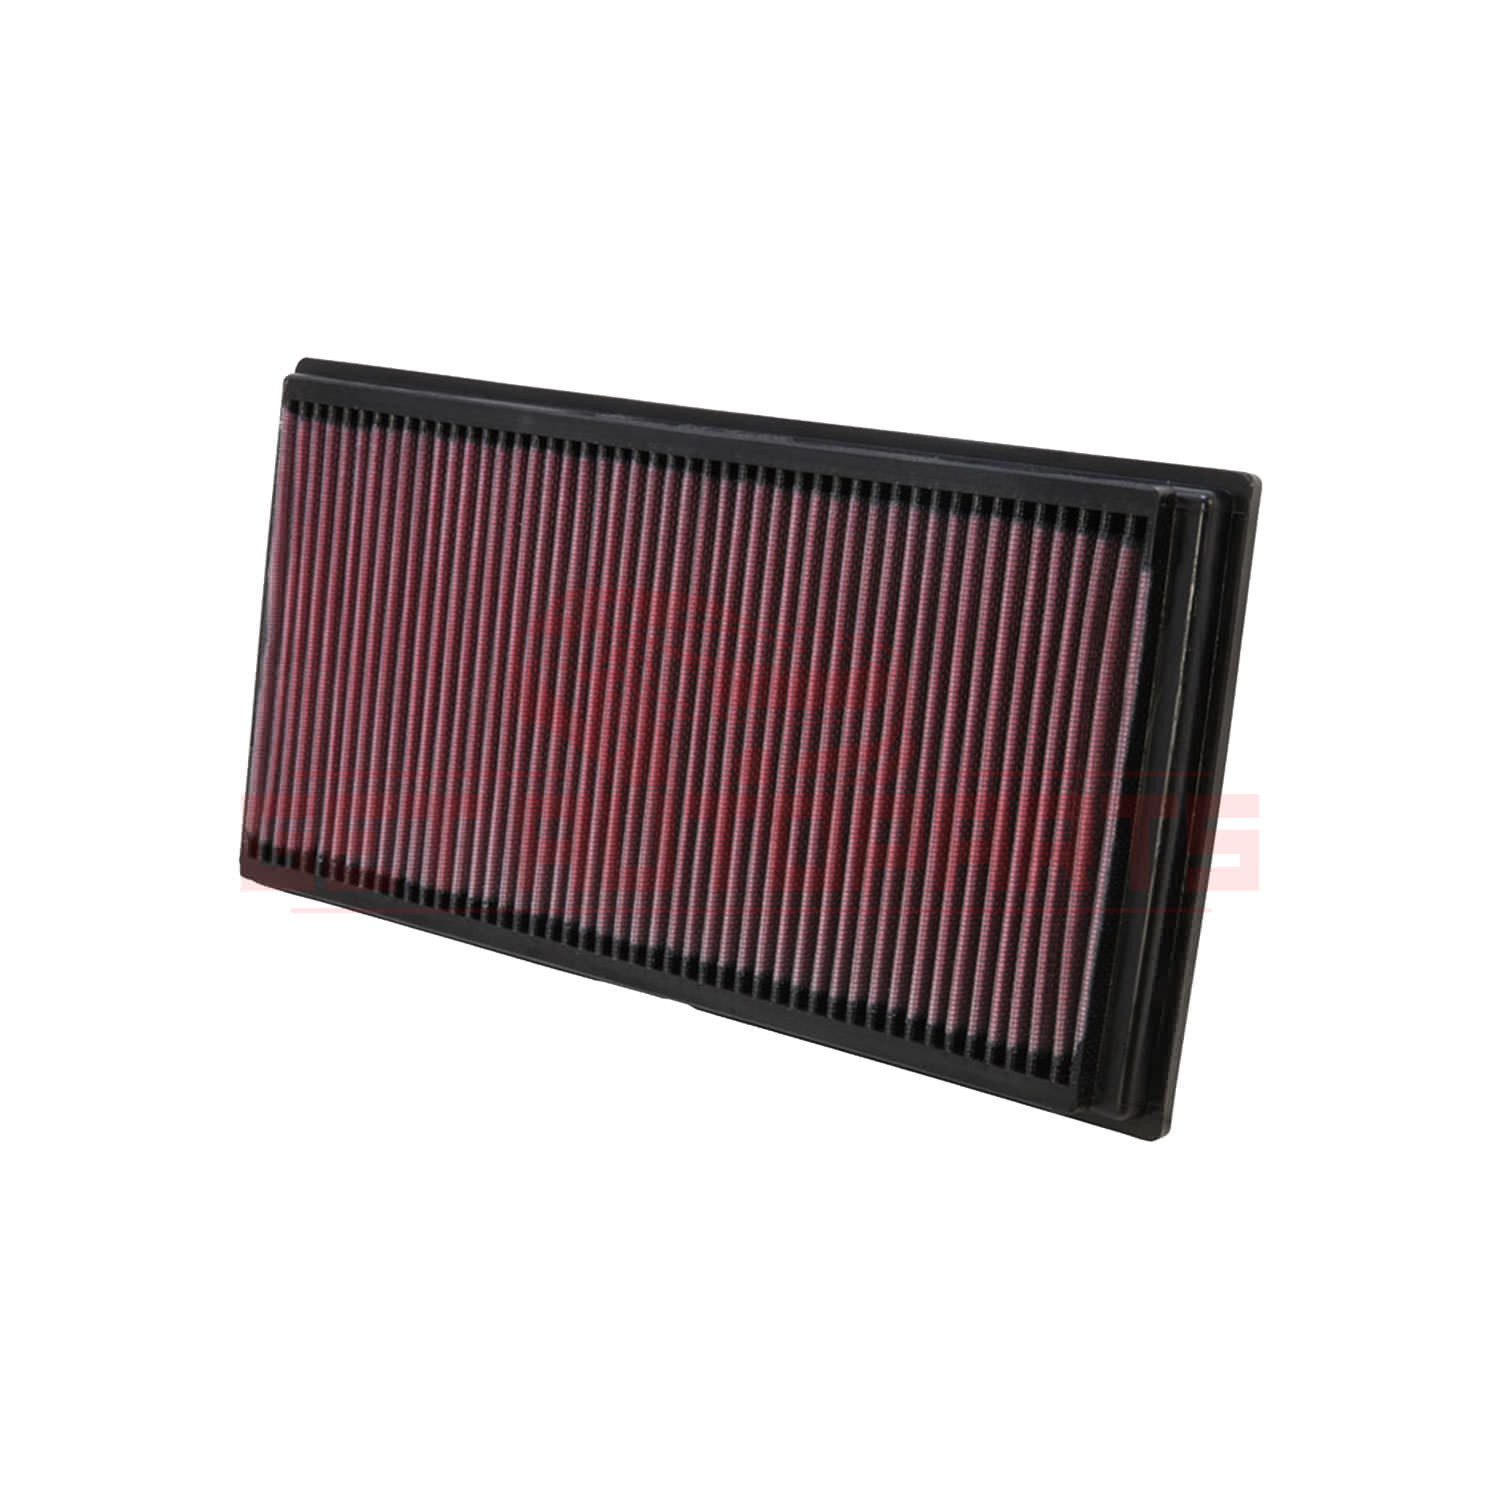 K&N Replacement Air Filter for Volkswagen Golf 1999-2006